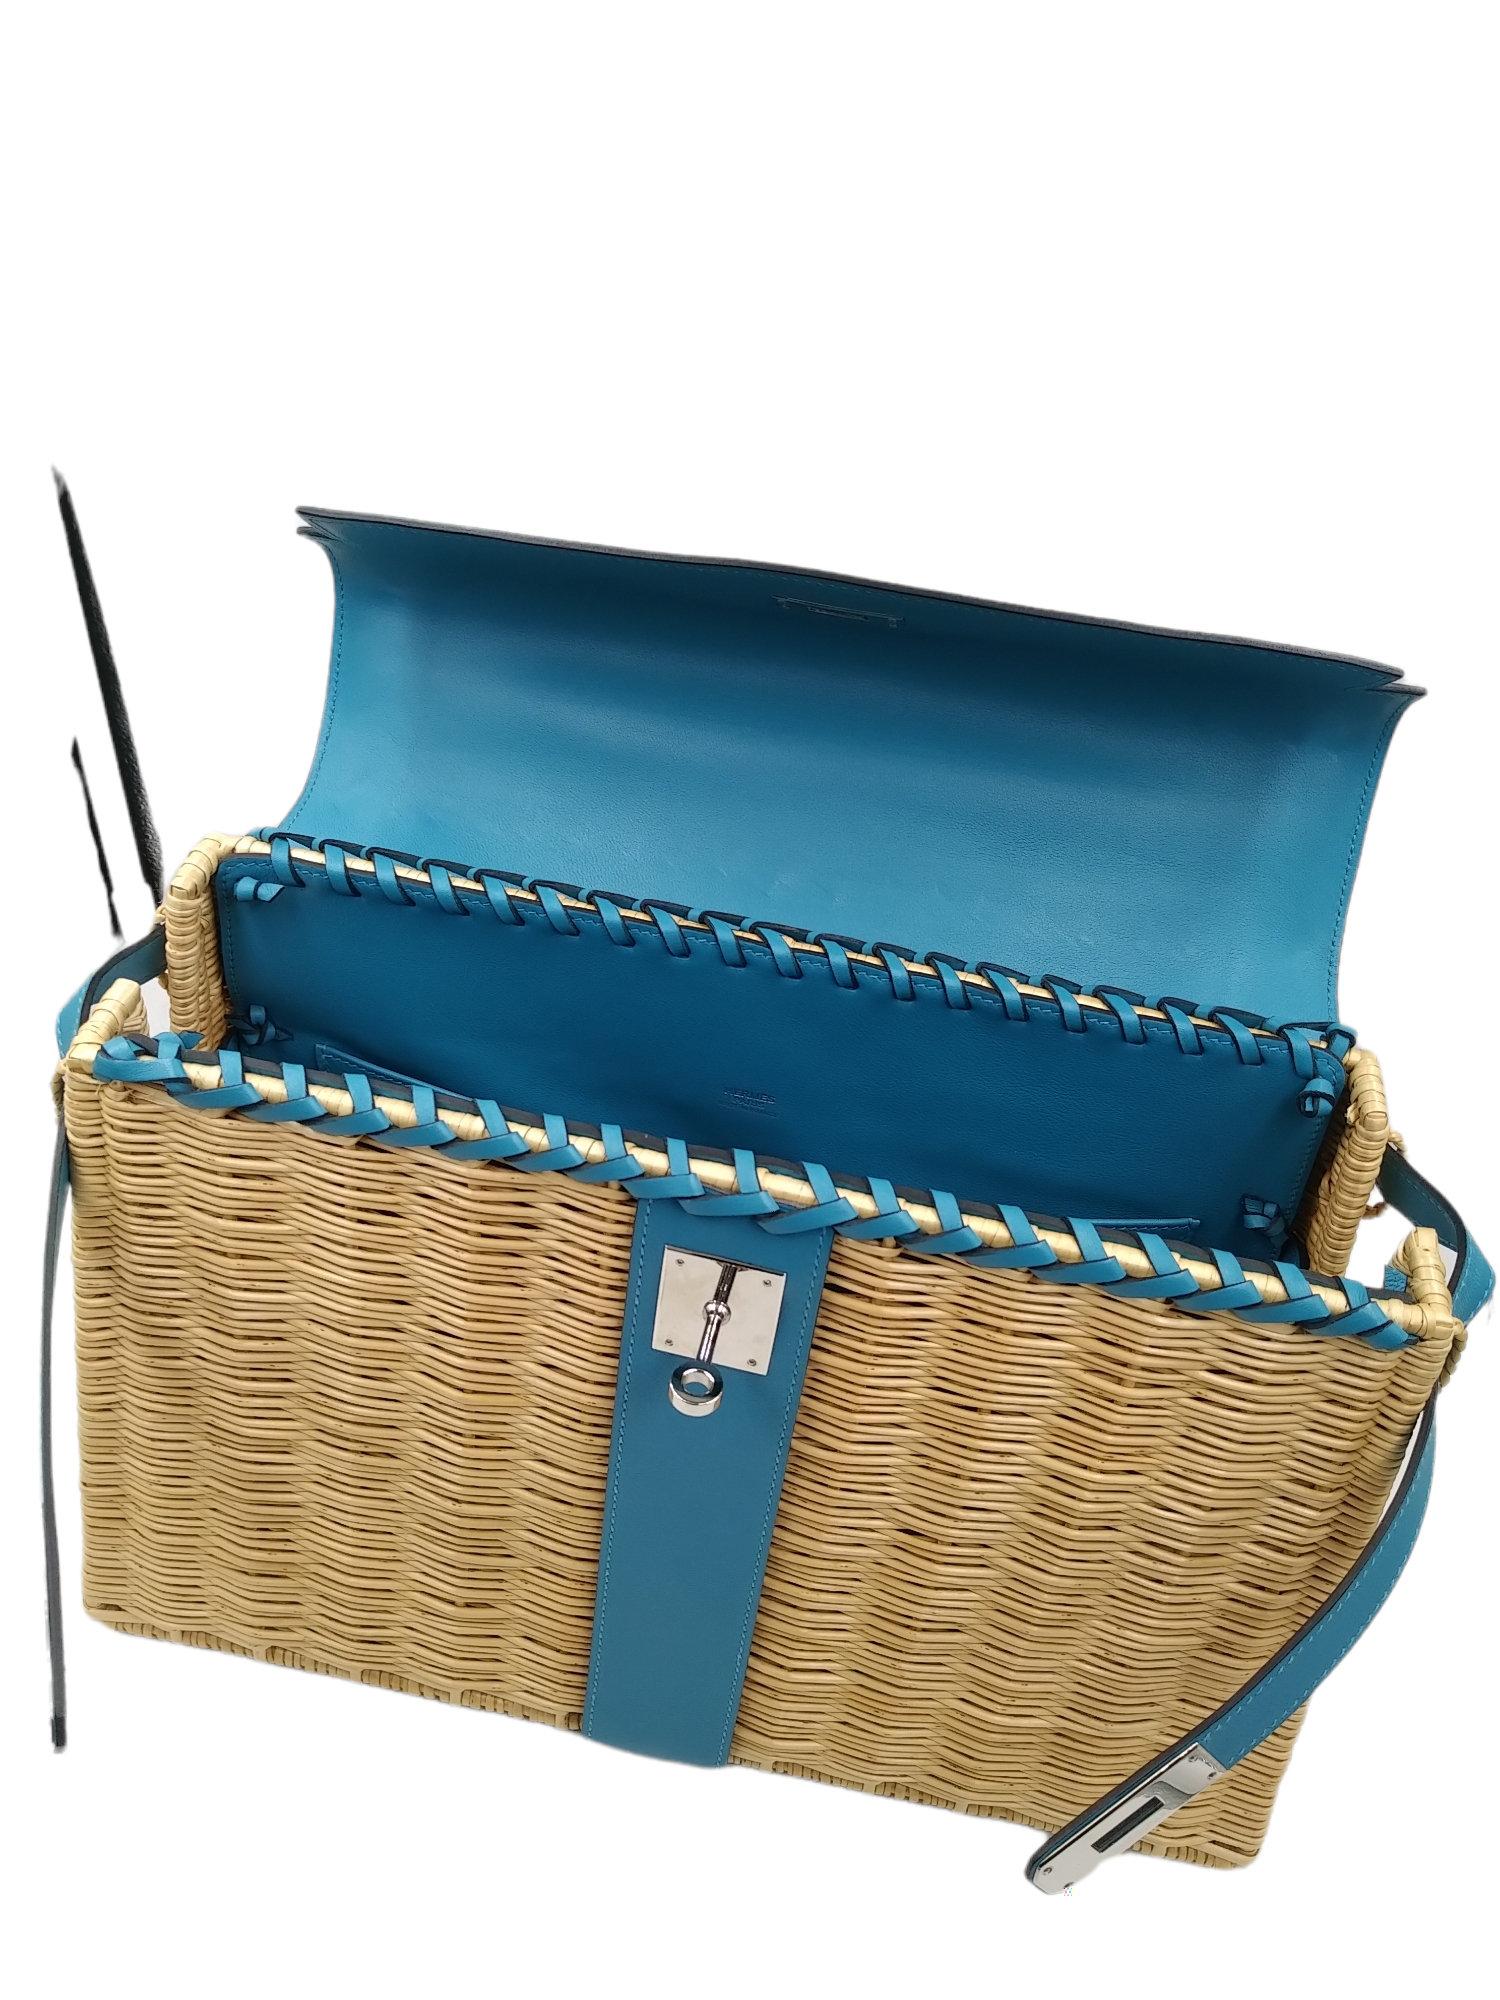 Hermès Wicker and Turquoise Barenia Leather Picnic Bag Kelly 35cm  For Sale 1